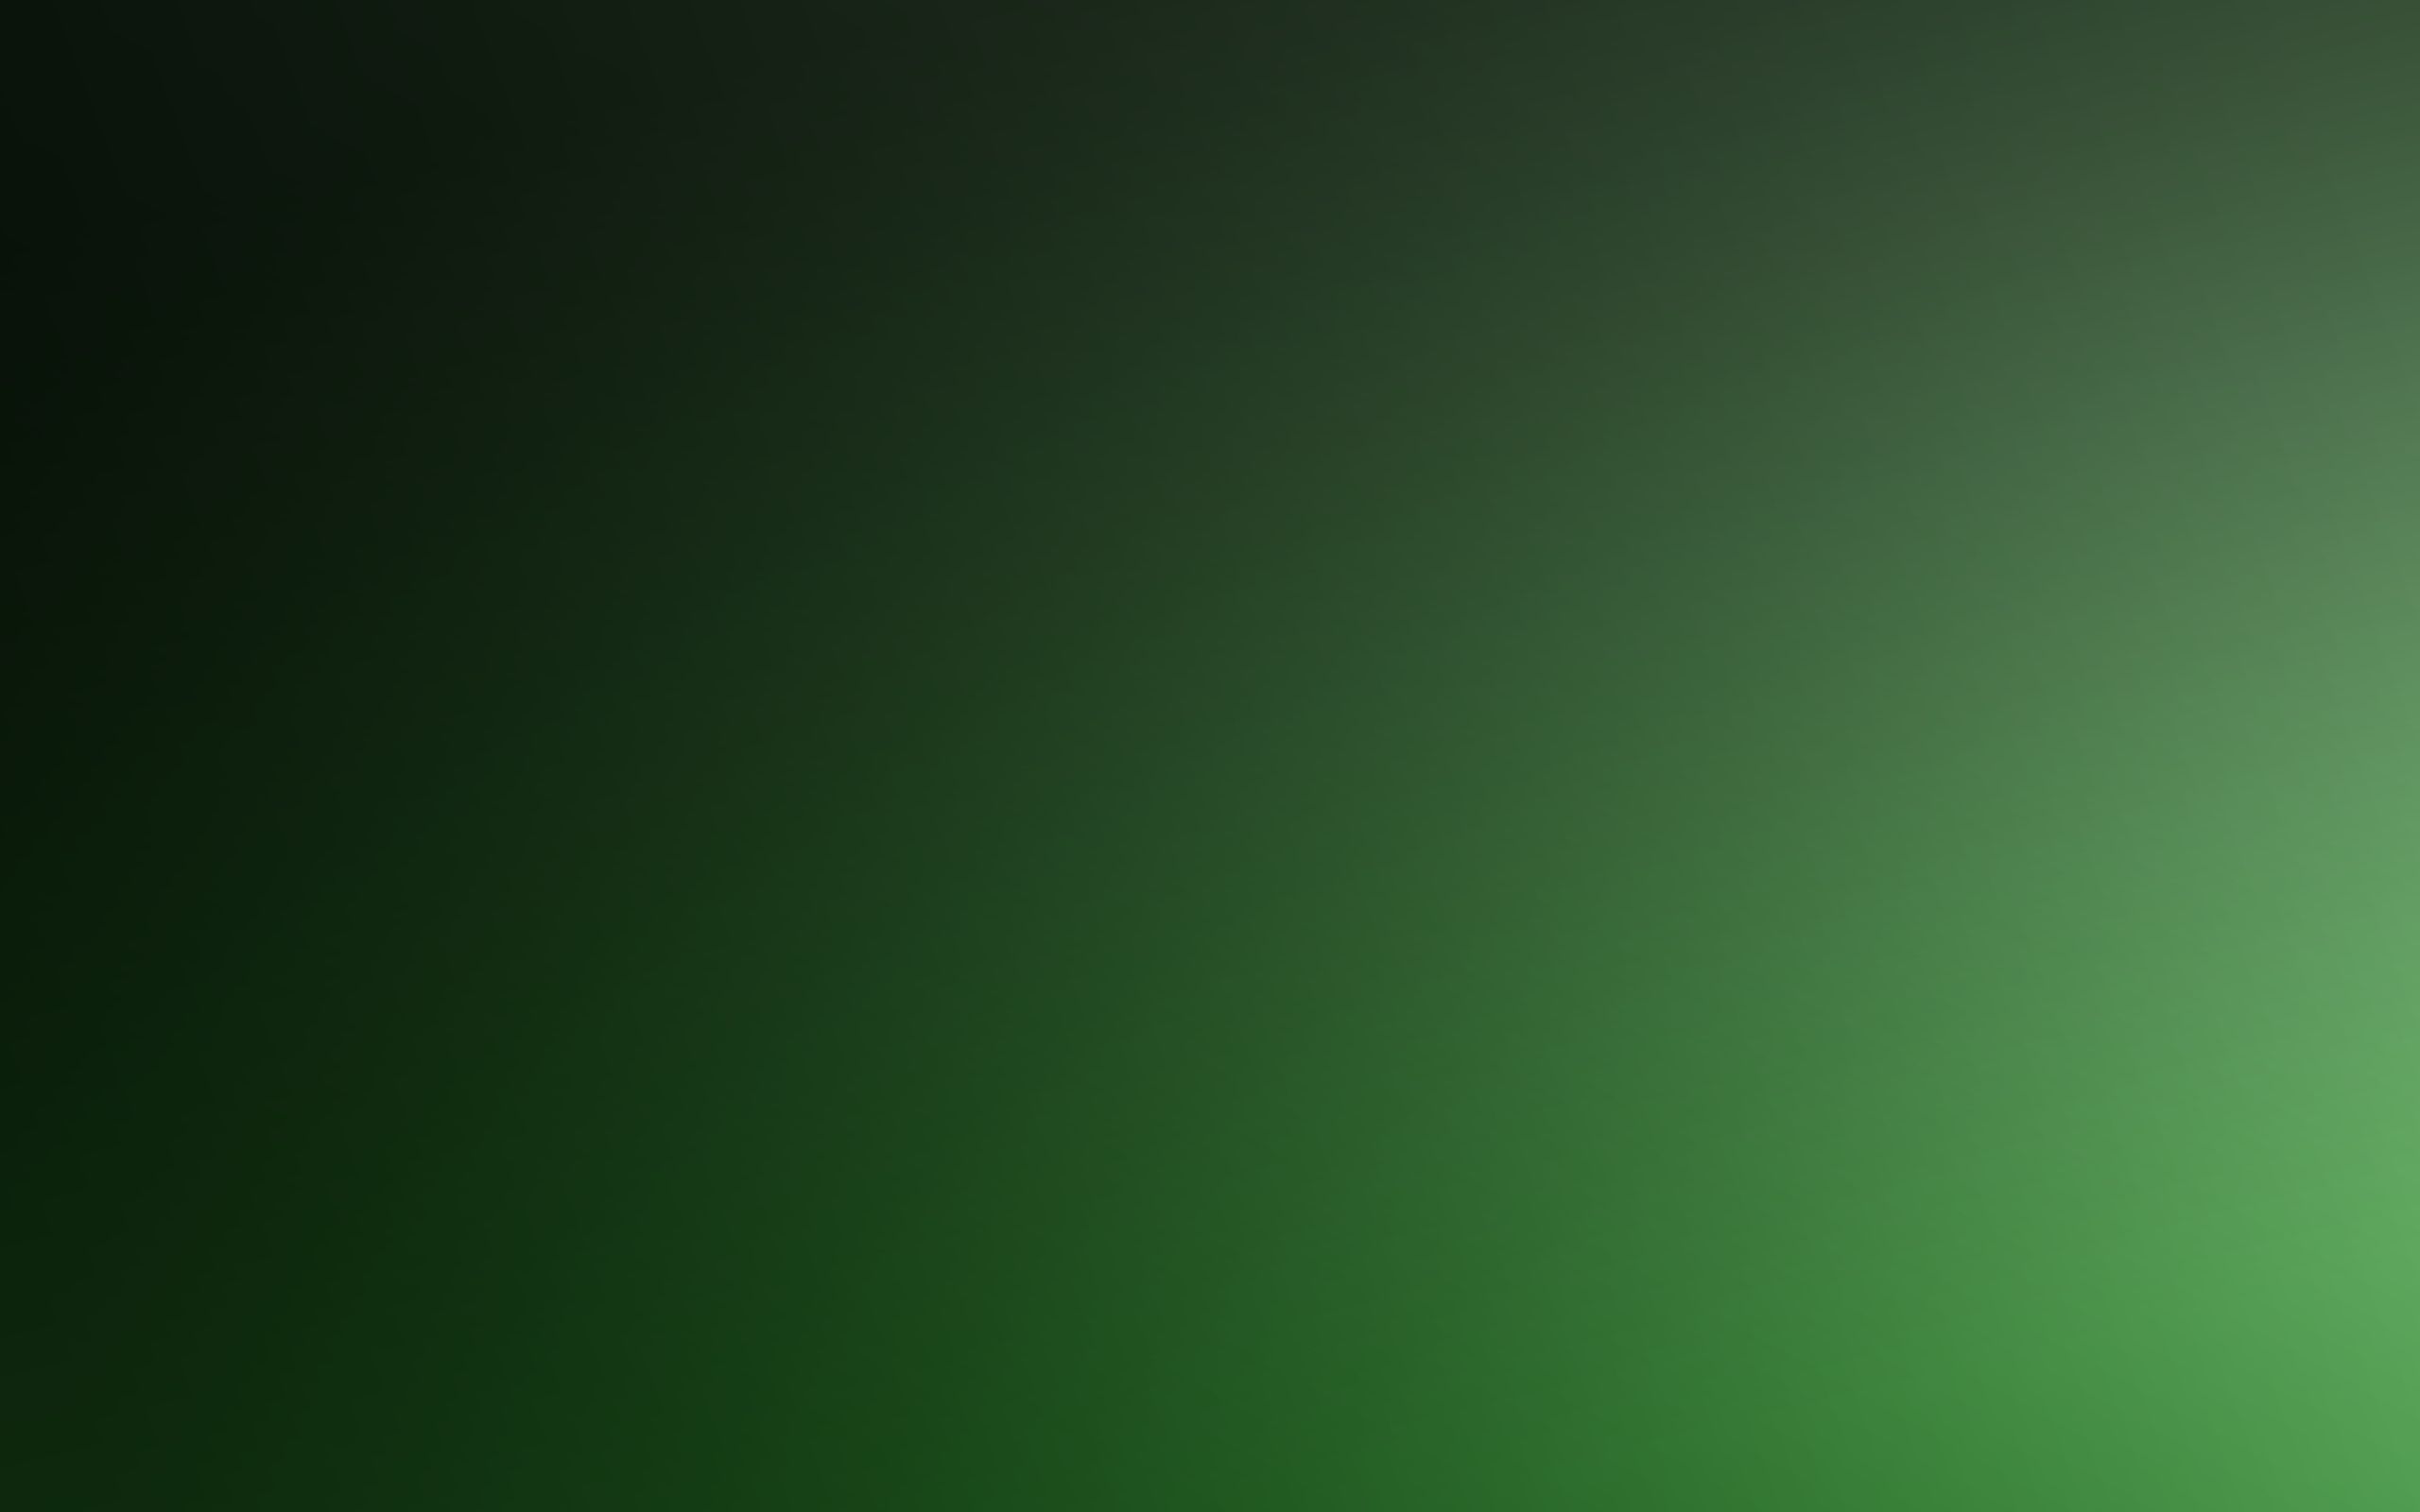 Solid Green Wallpaper 67 images